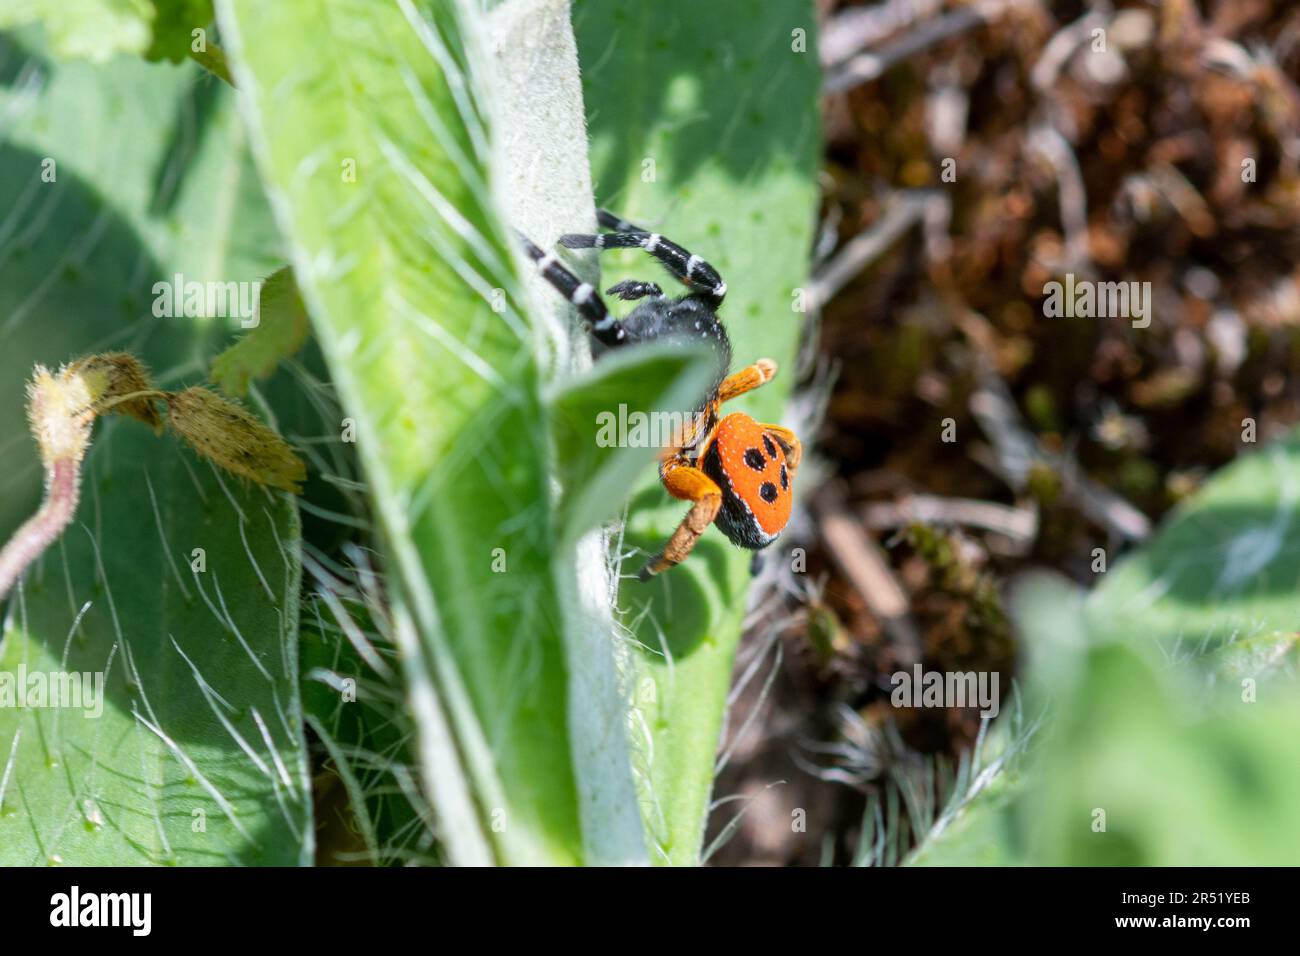 Ladybird spider (Eresus kollari), a brightly coloured spider in the Eresidae family, among vegetation in grassland habitat in Central Italy, Europe Stock Photo